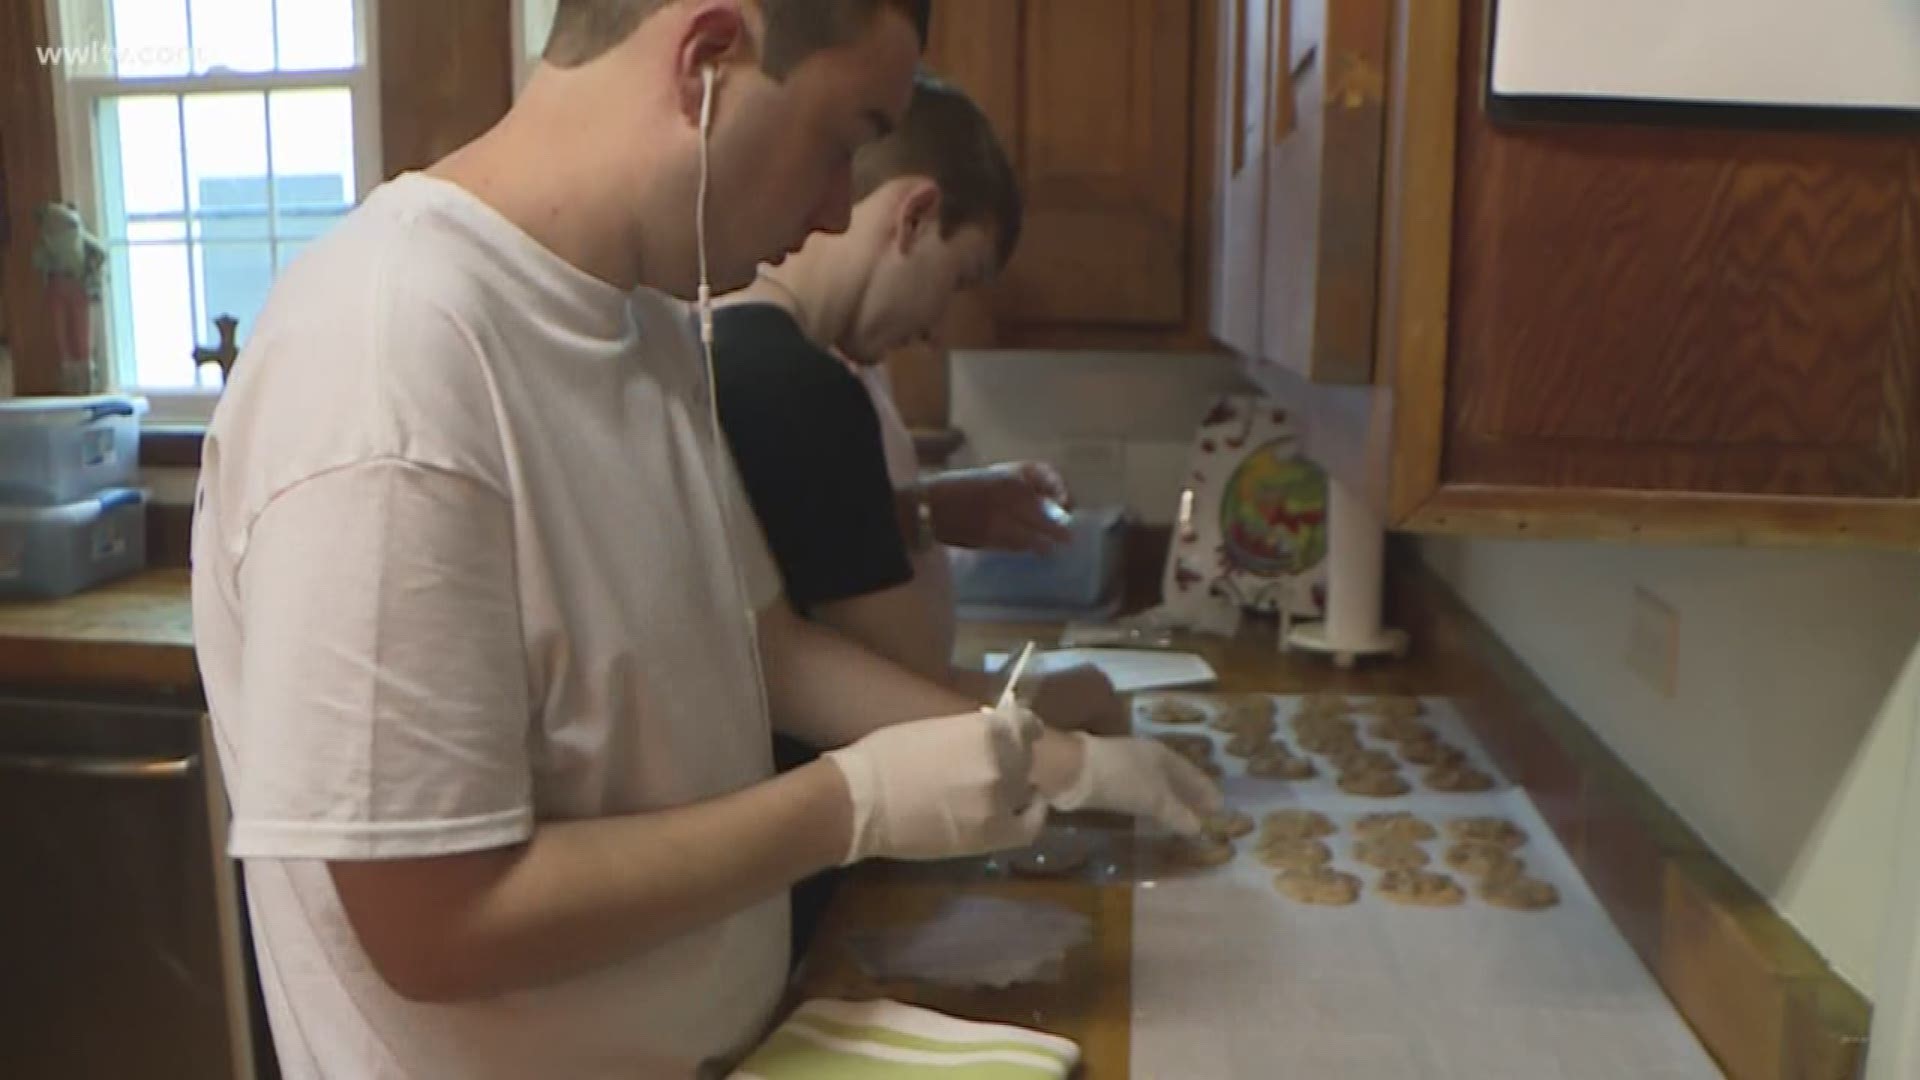 One Metairie family decided to take a chance on something sweet.